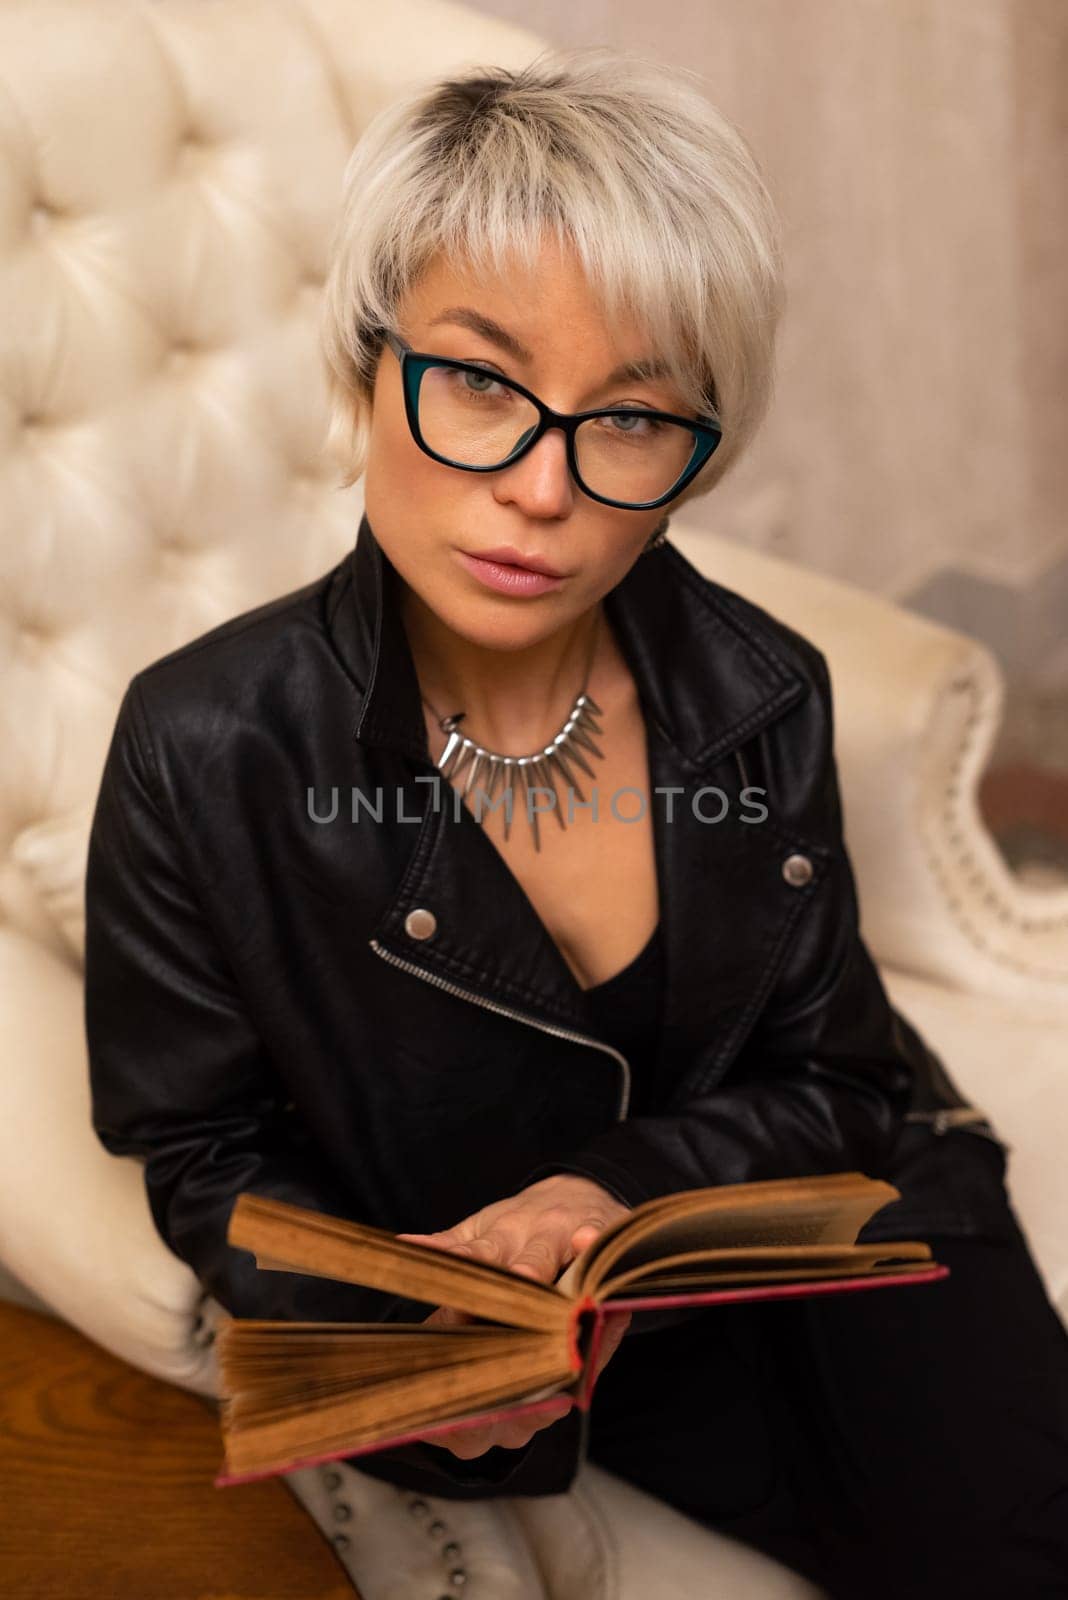 Portrait of an adult beautiful girl with glasses and short hair, holding a book in her hand in room